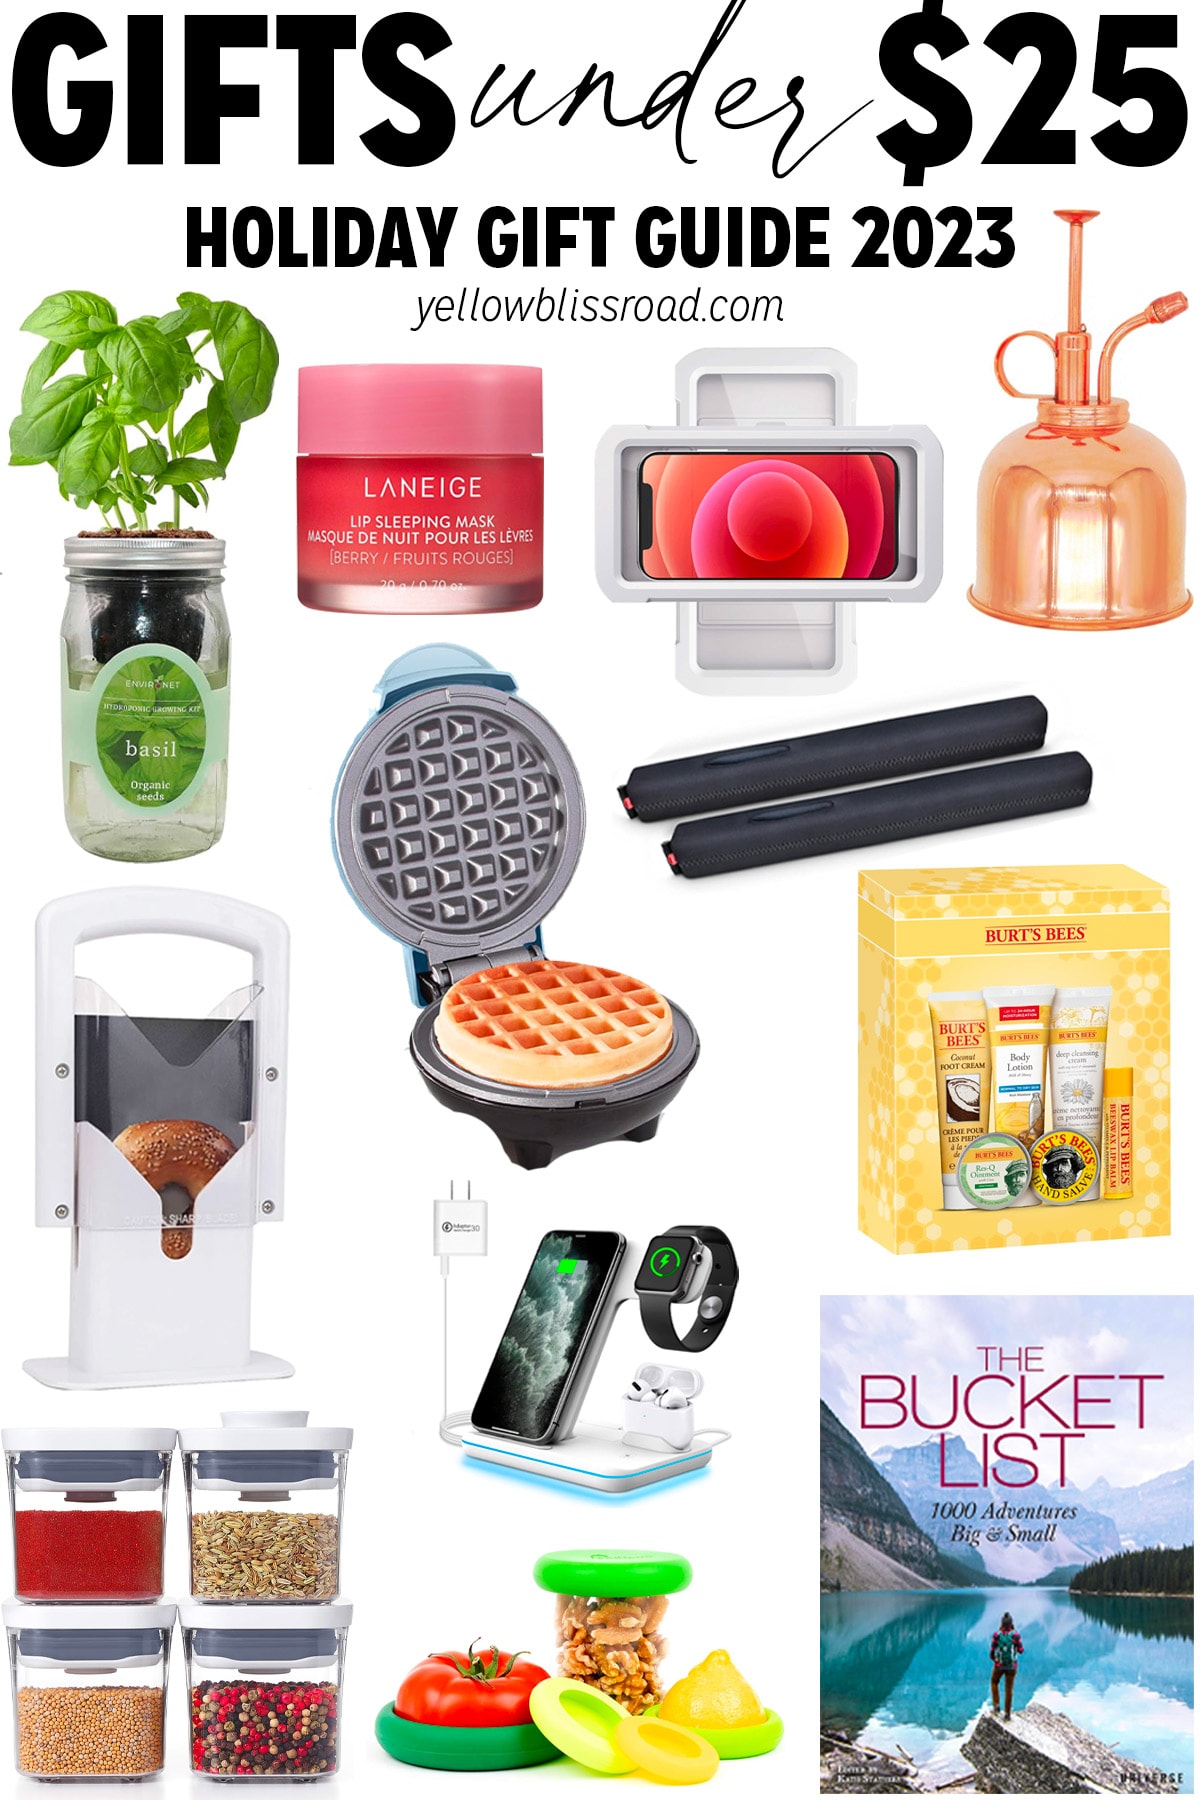 2023 Holiday Gift Guide: Budget Gifts Under $25